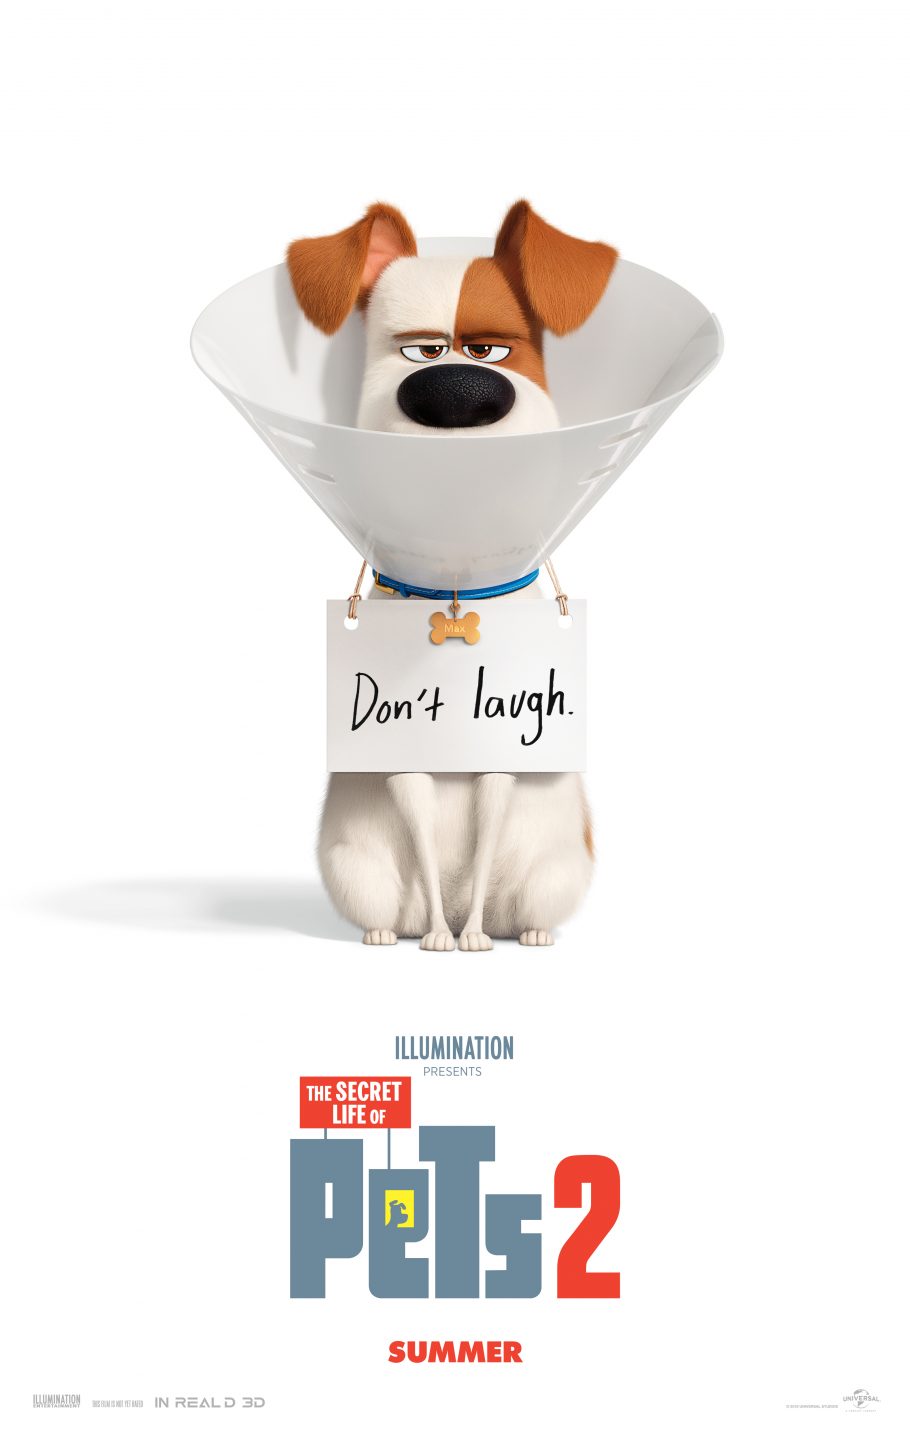 The Secret Life Of Pets 2 poster (Universal Pictures)